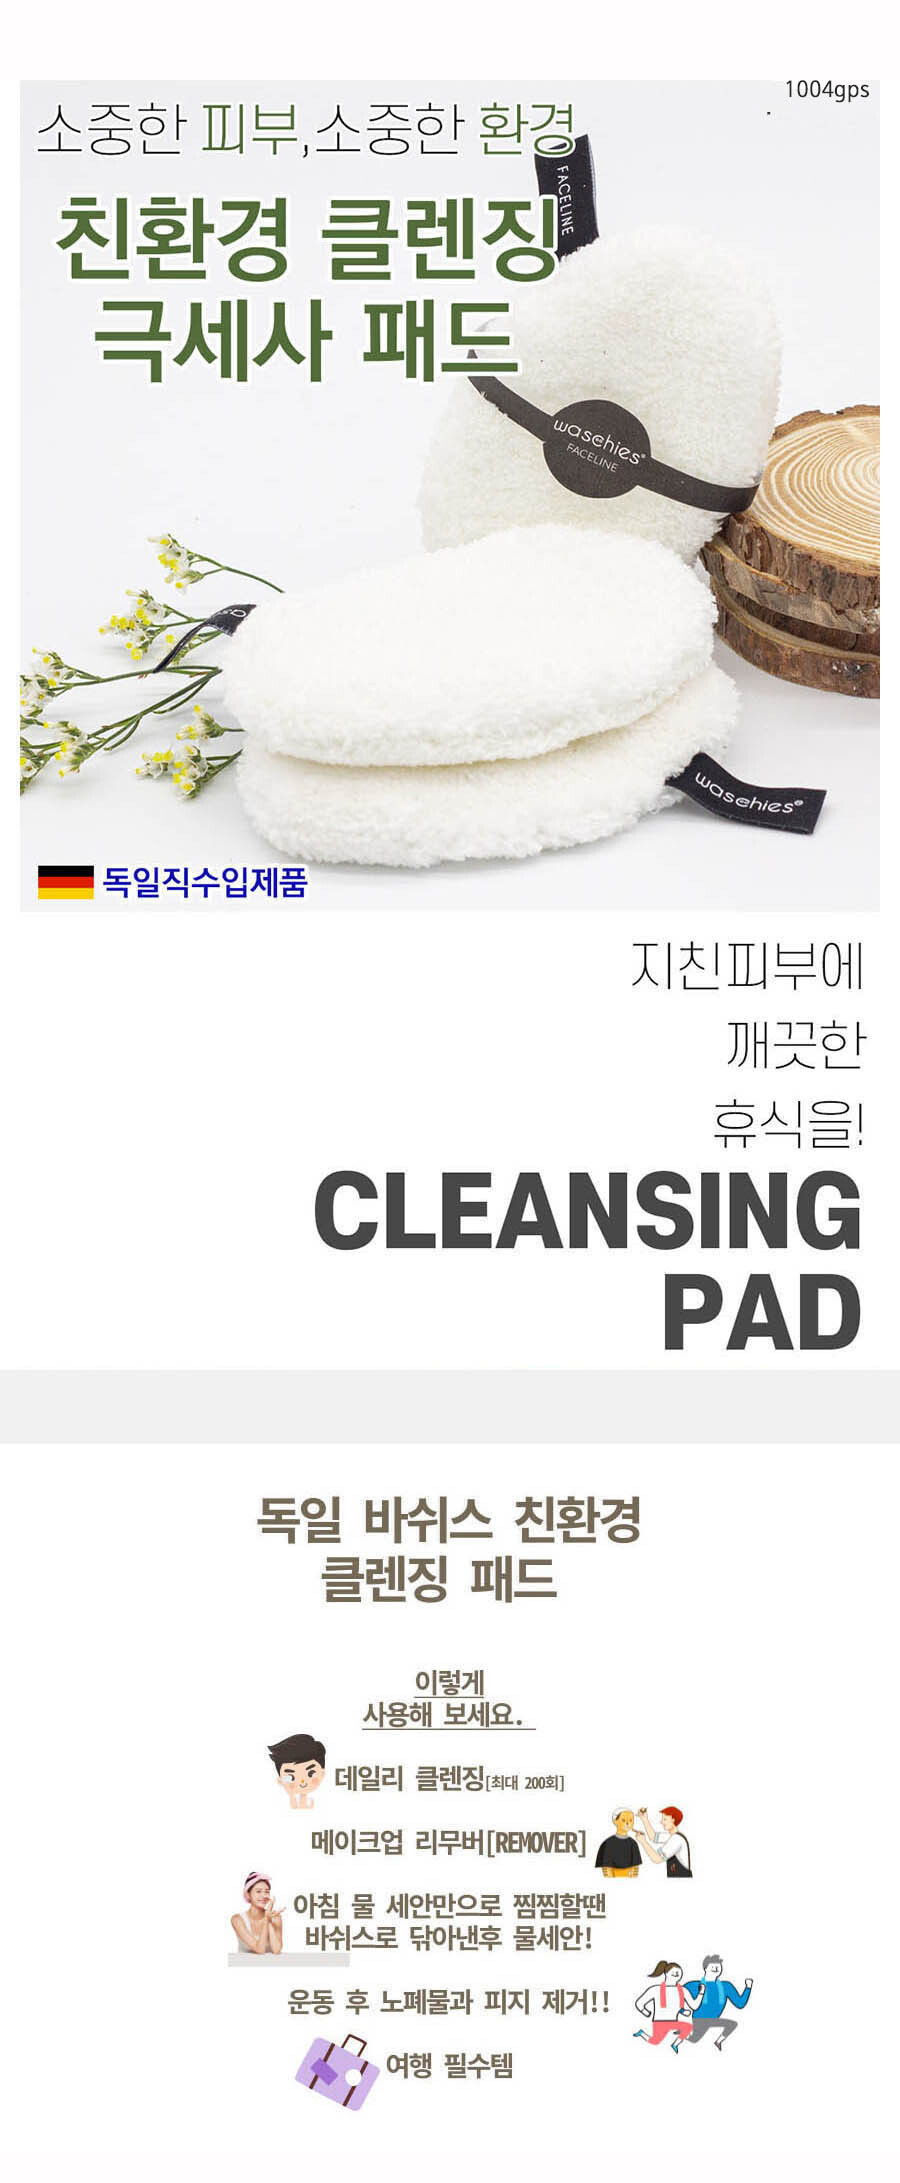 waschies-cleansing-pad-01.jpg